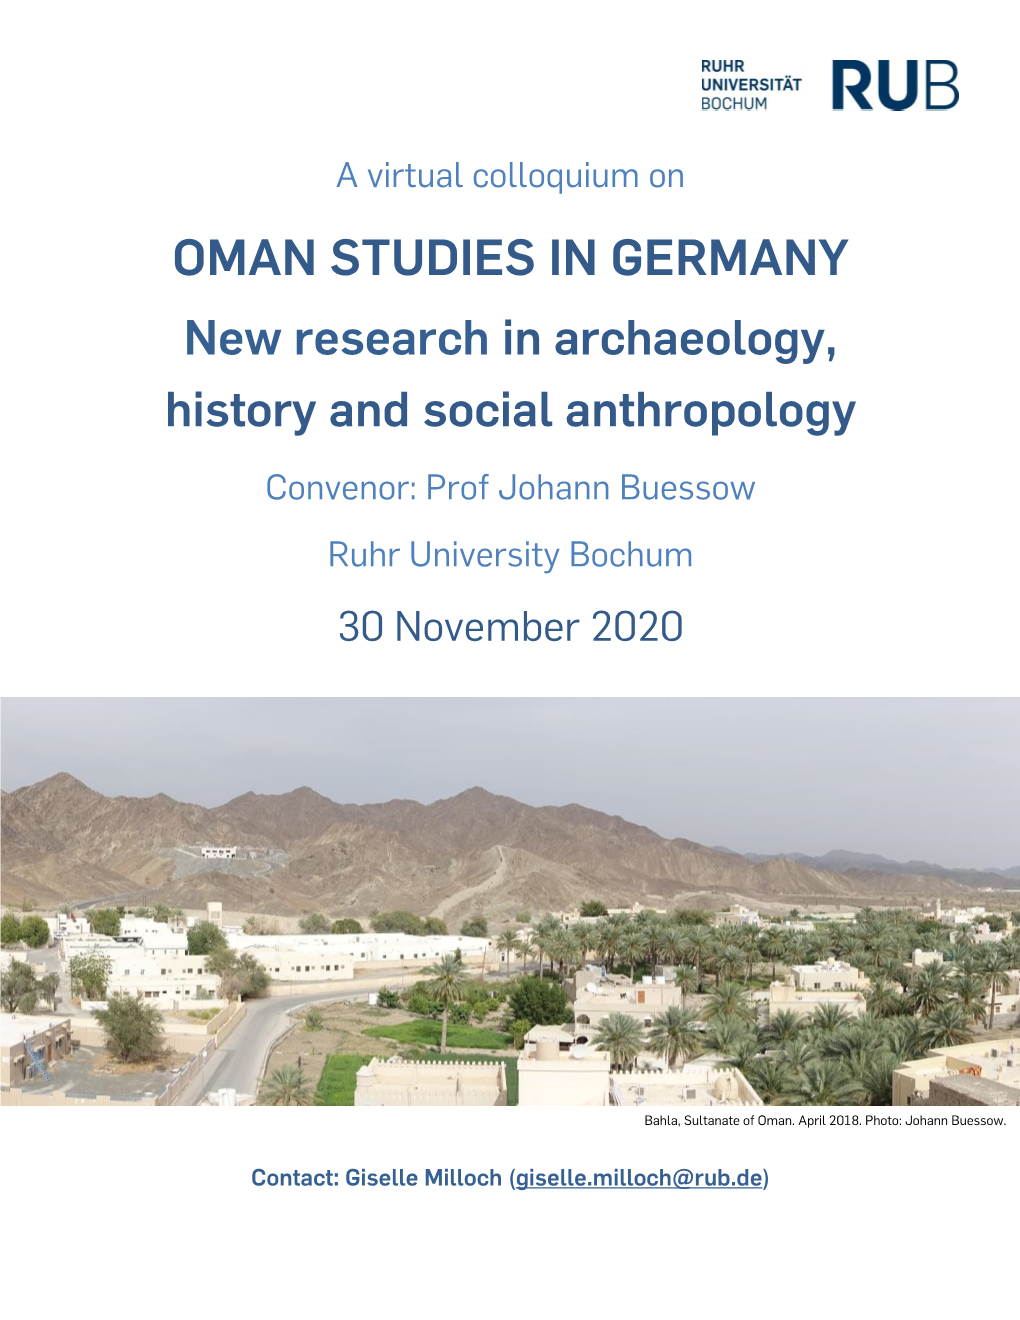 OMAN STUDIES in GERMANY New Research in Archaeology, History and Social Anthropology Convenor: Prof Johann Buessow Ruhr University Bochum 30 November 2020